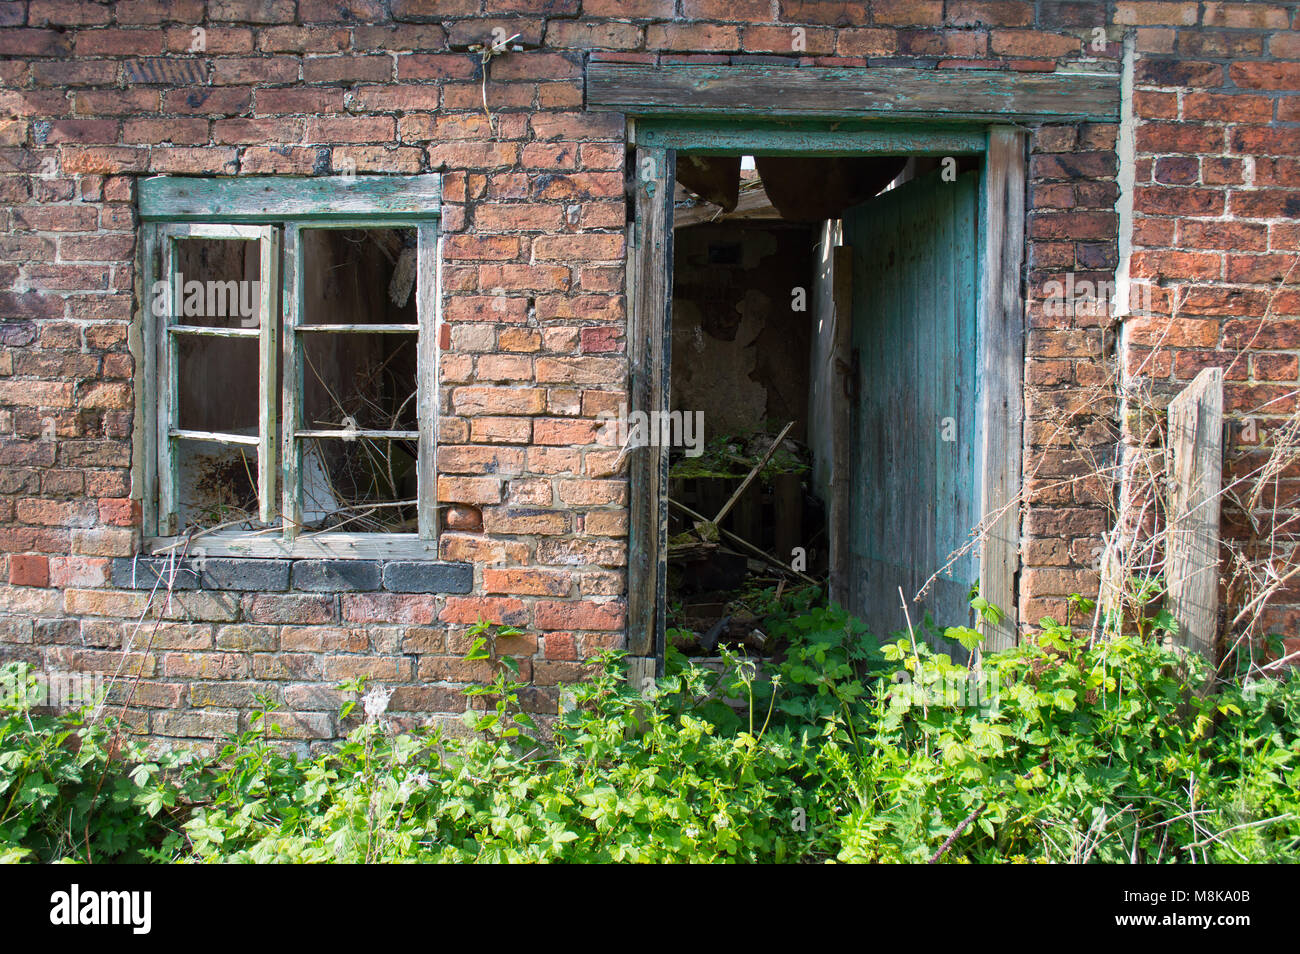 An old derelict, rotted green window and door frame against a red brick wall, with overgrown plants and brambles. Stock Photo